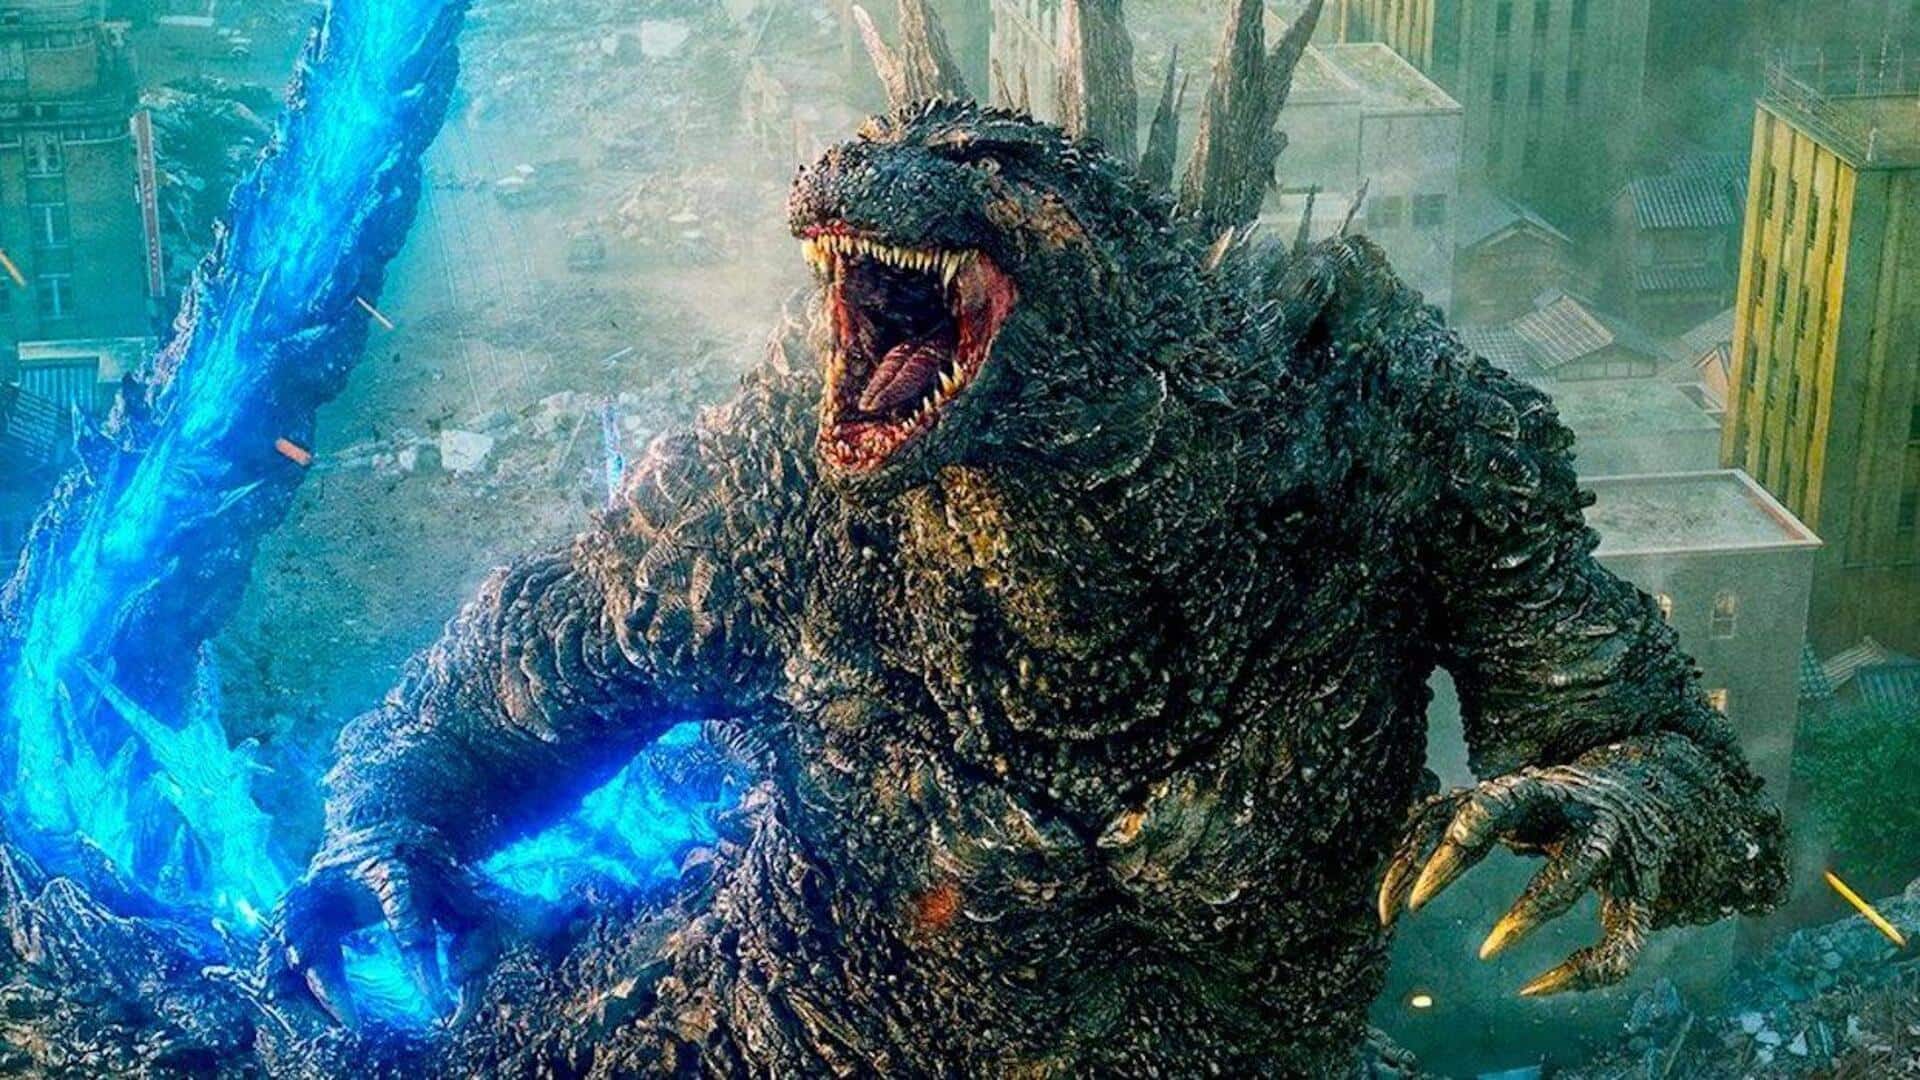 Why 'Godzilla Minus One' might not release in India? Revealed